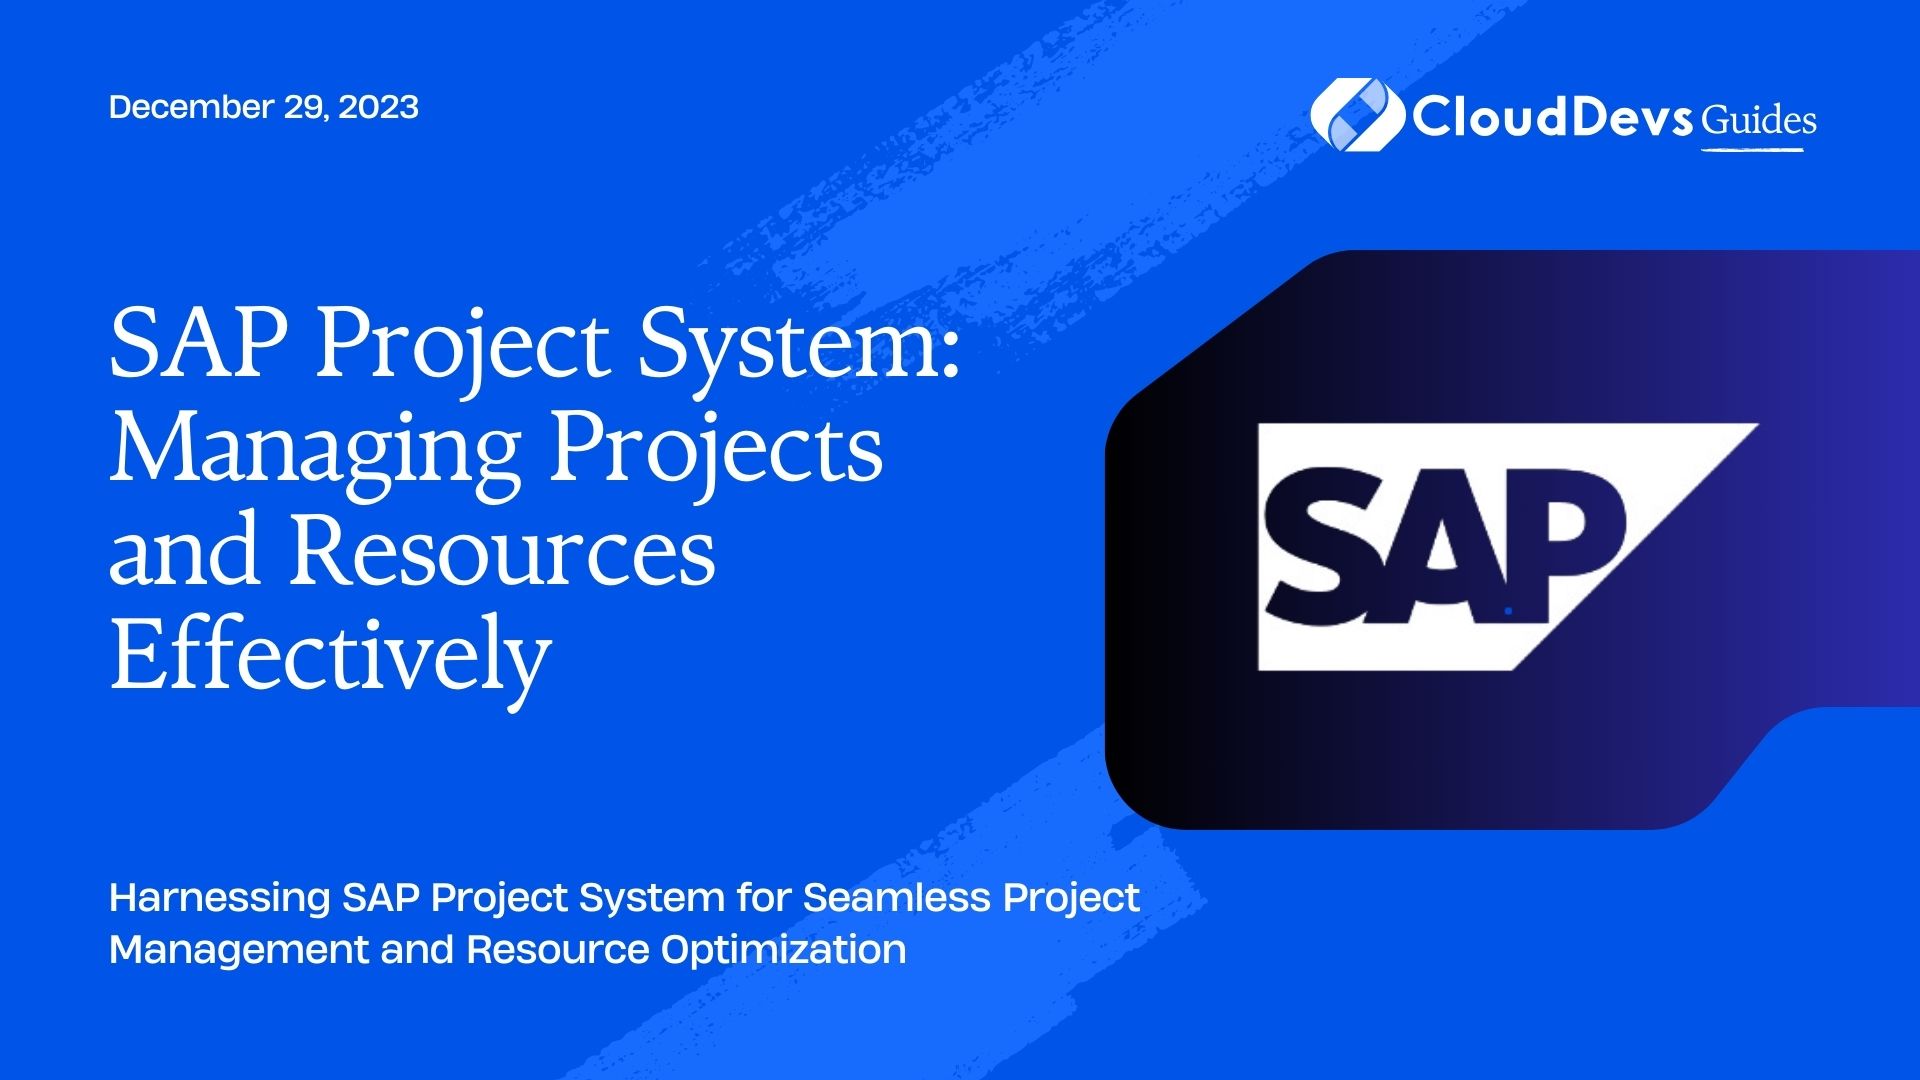 SAP Project System: Managing Projects and Resources Effectively